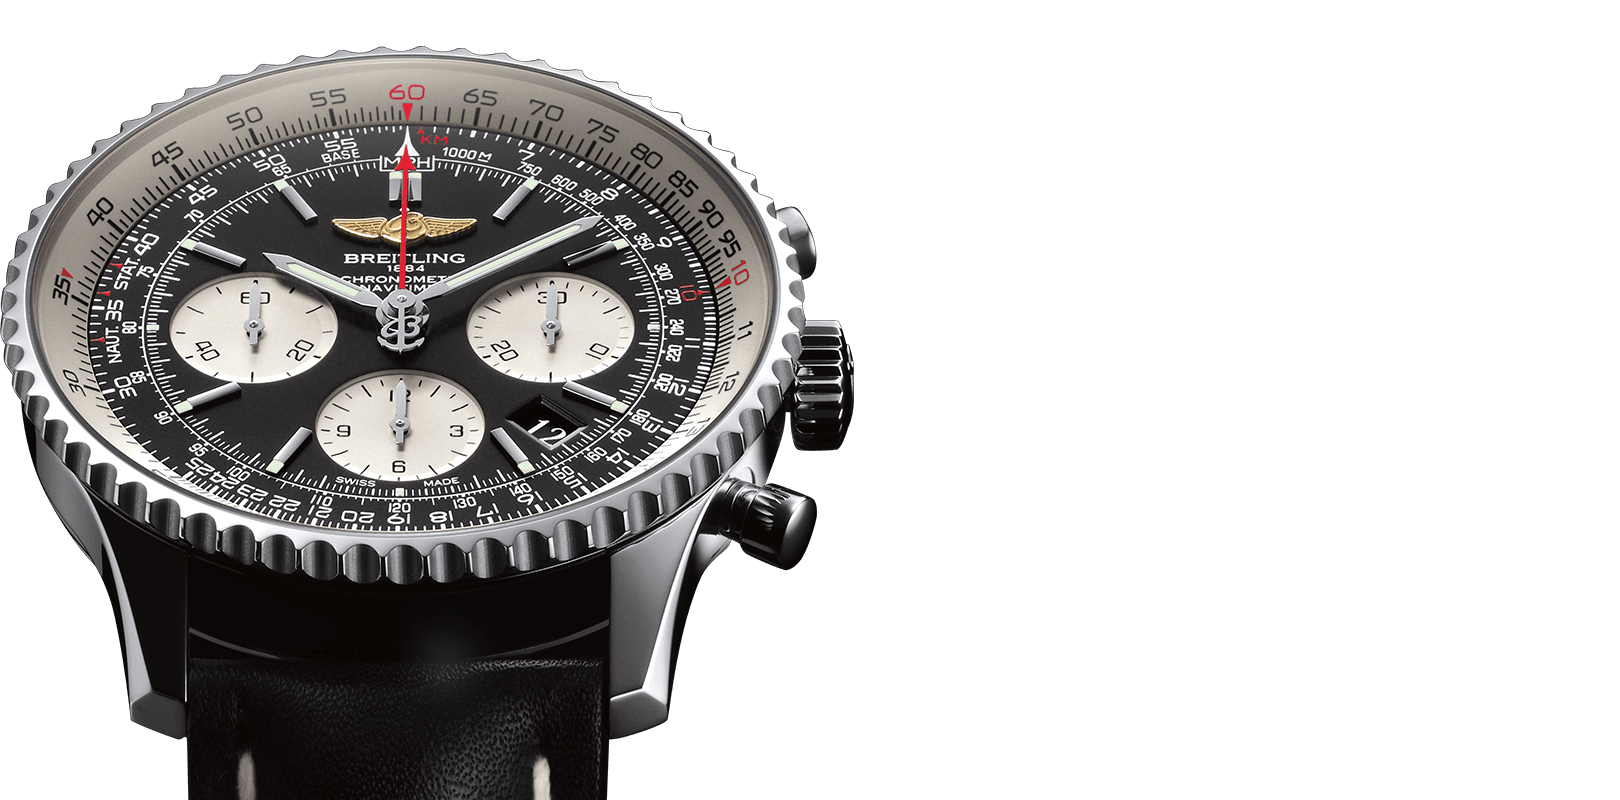 Premier breitling Heritage B15 with Figure 42